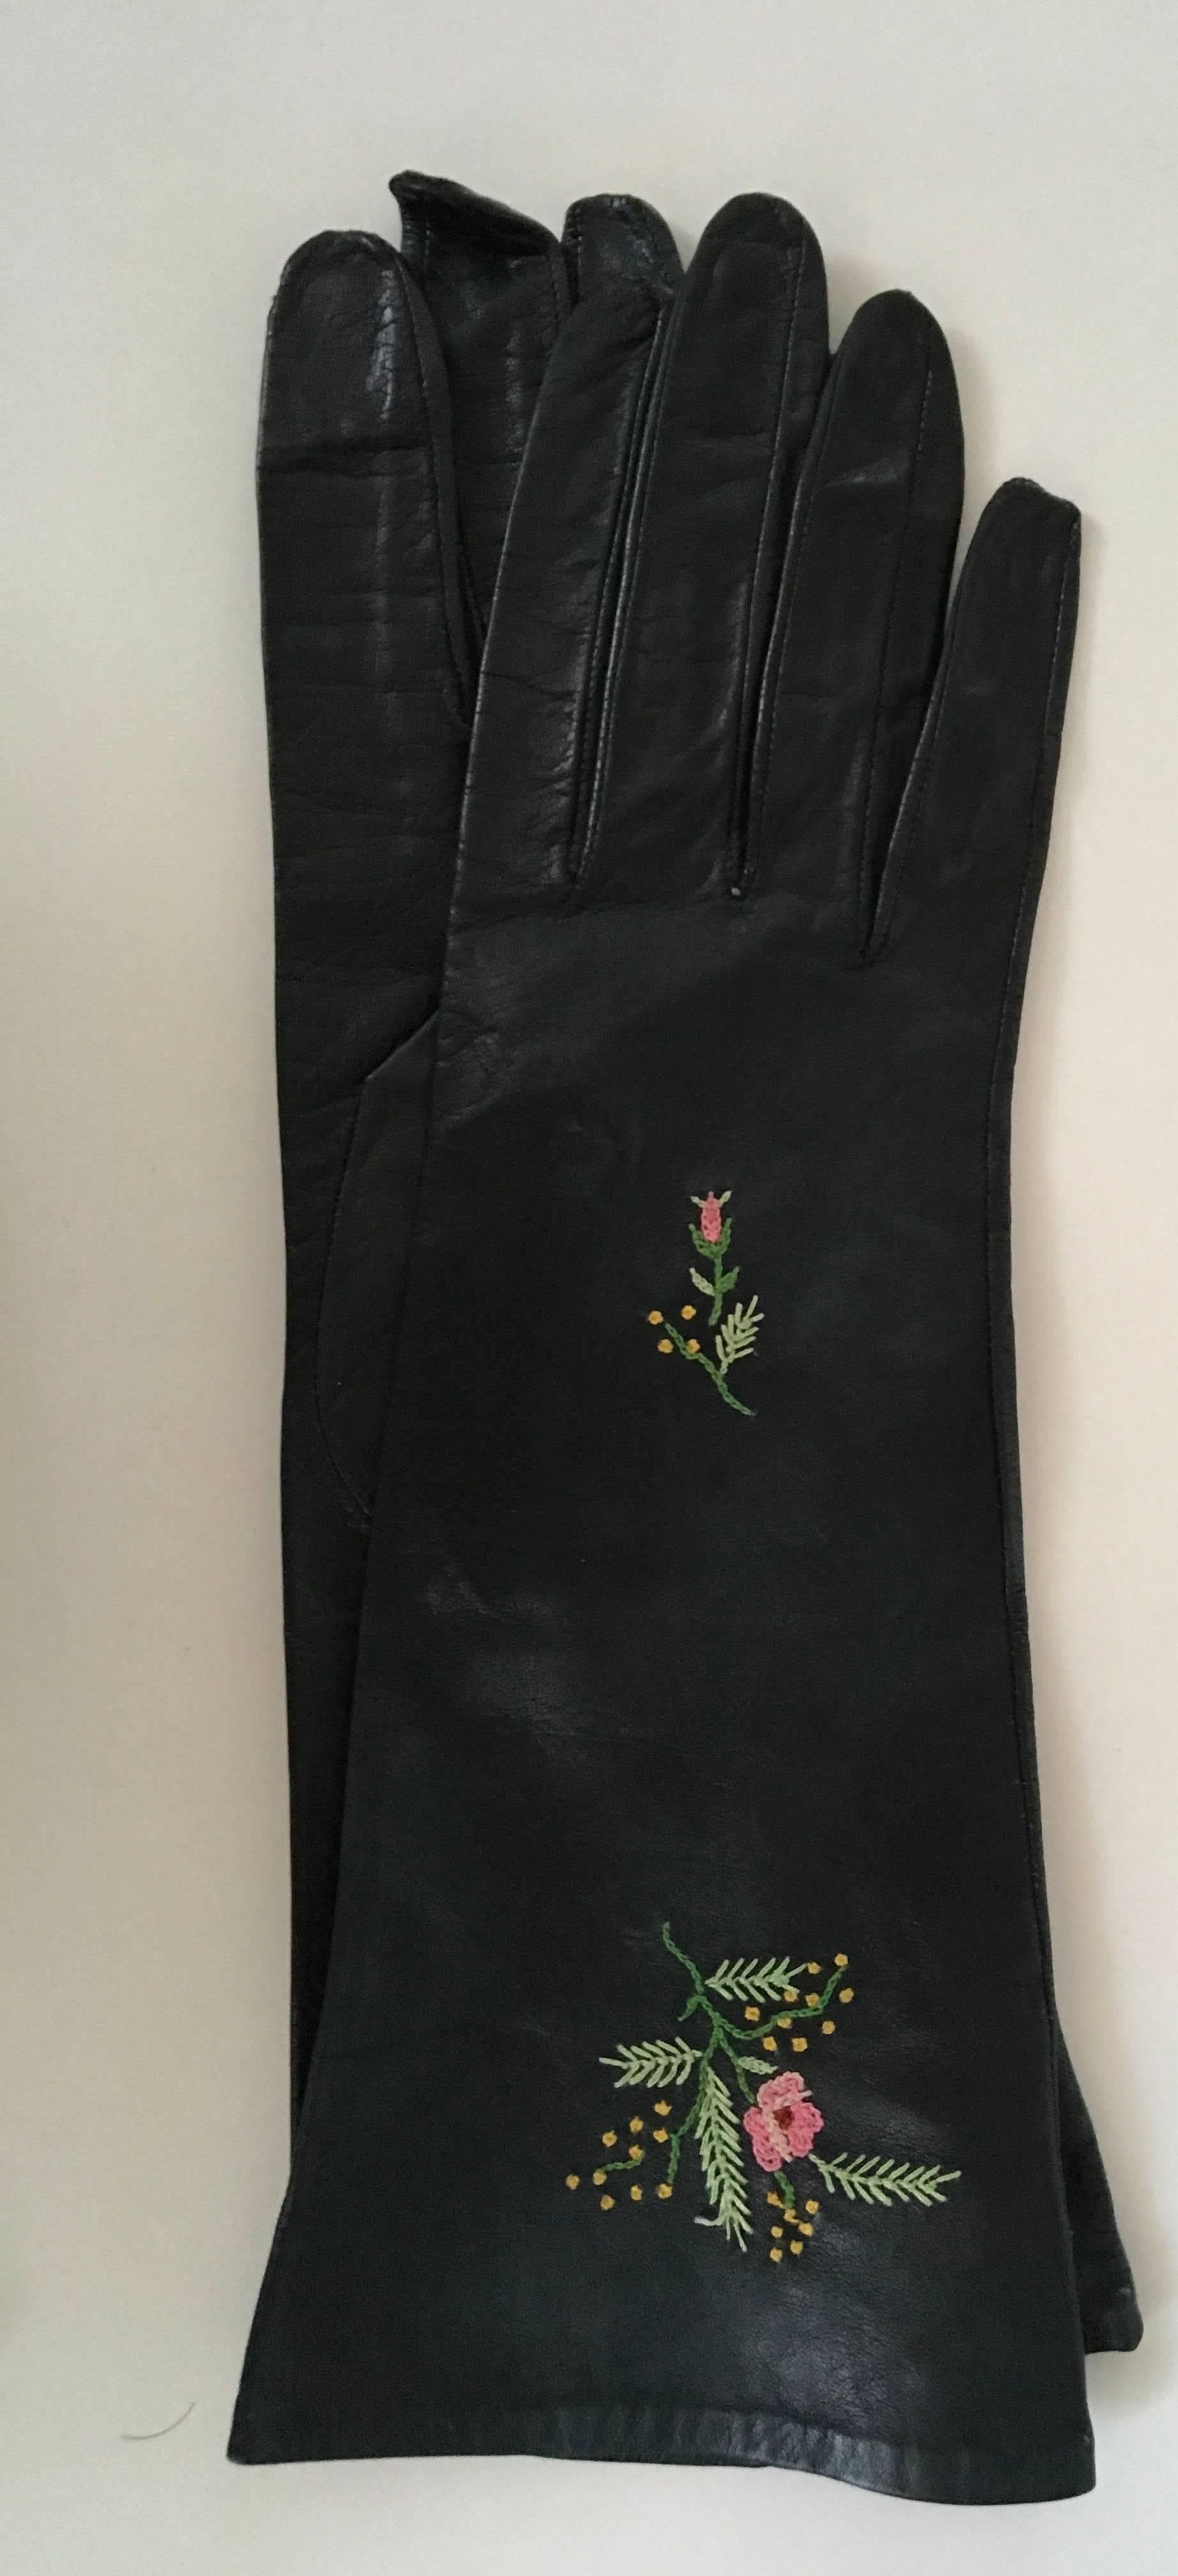 Presented here are two never used new gloves from the late 50's. One pair is comprised of beautiful black leather with hand stitched floral design in a size 6. The beautiful gloves seem small because ladies hands in the 60's were smaller. They